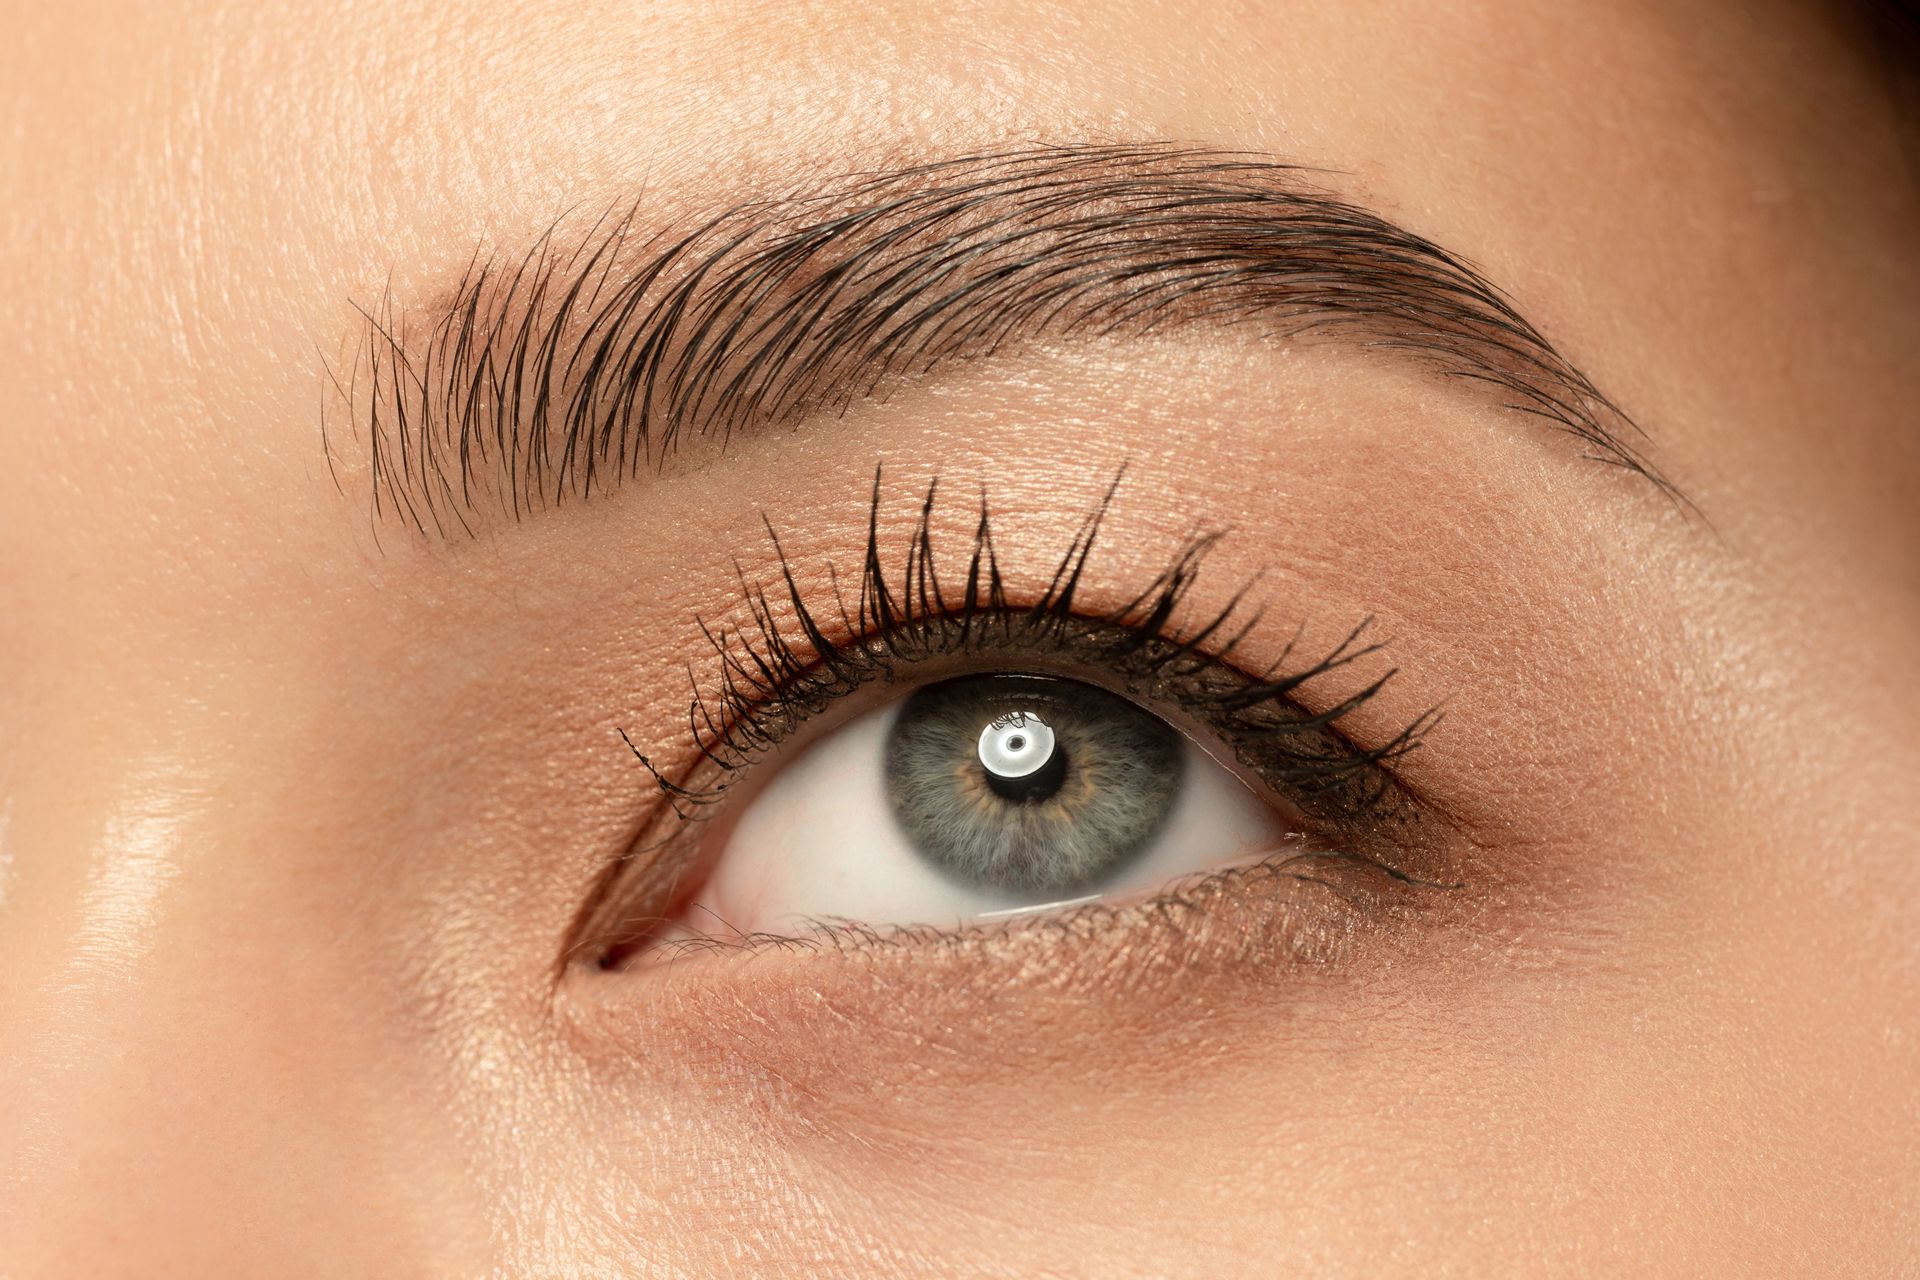 A close up of a woman 's eye with mascara and eyebrows.